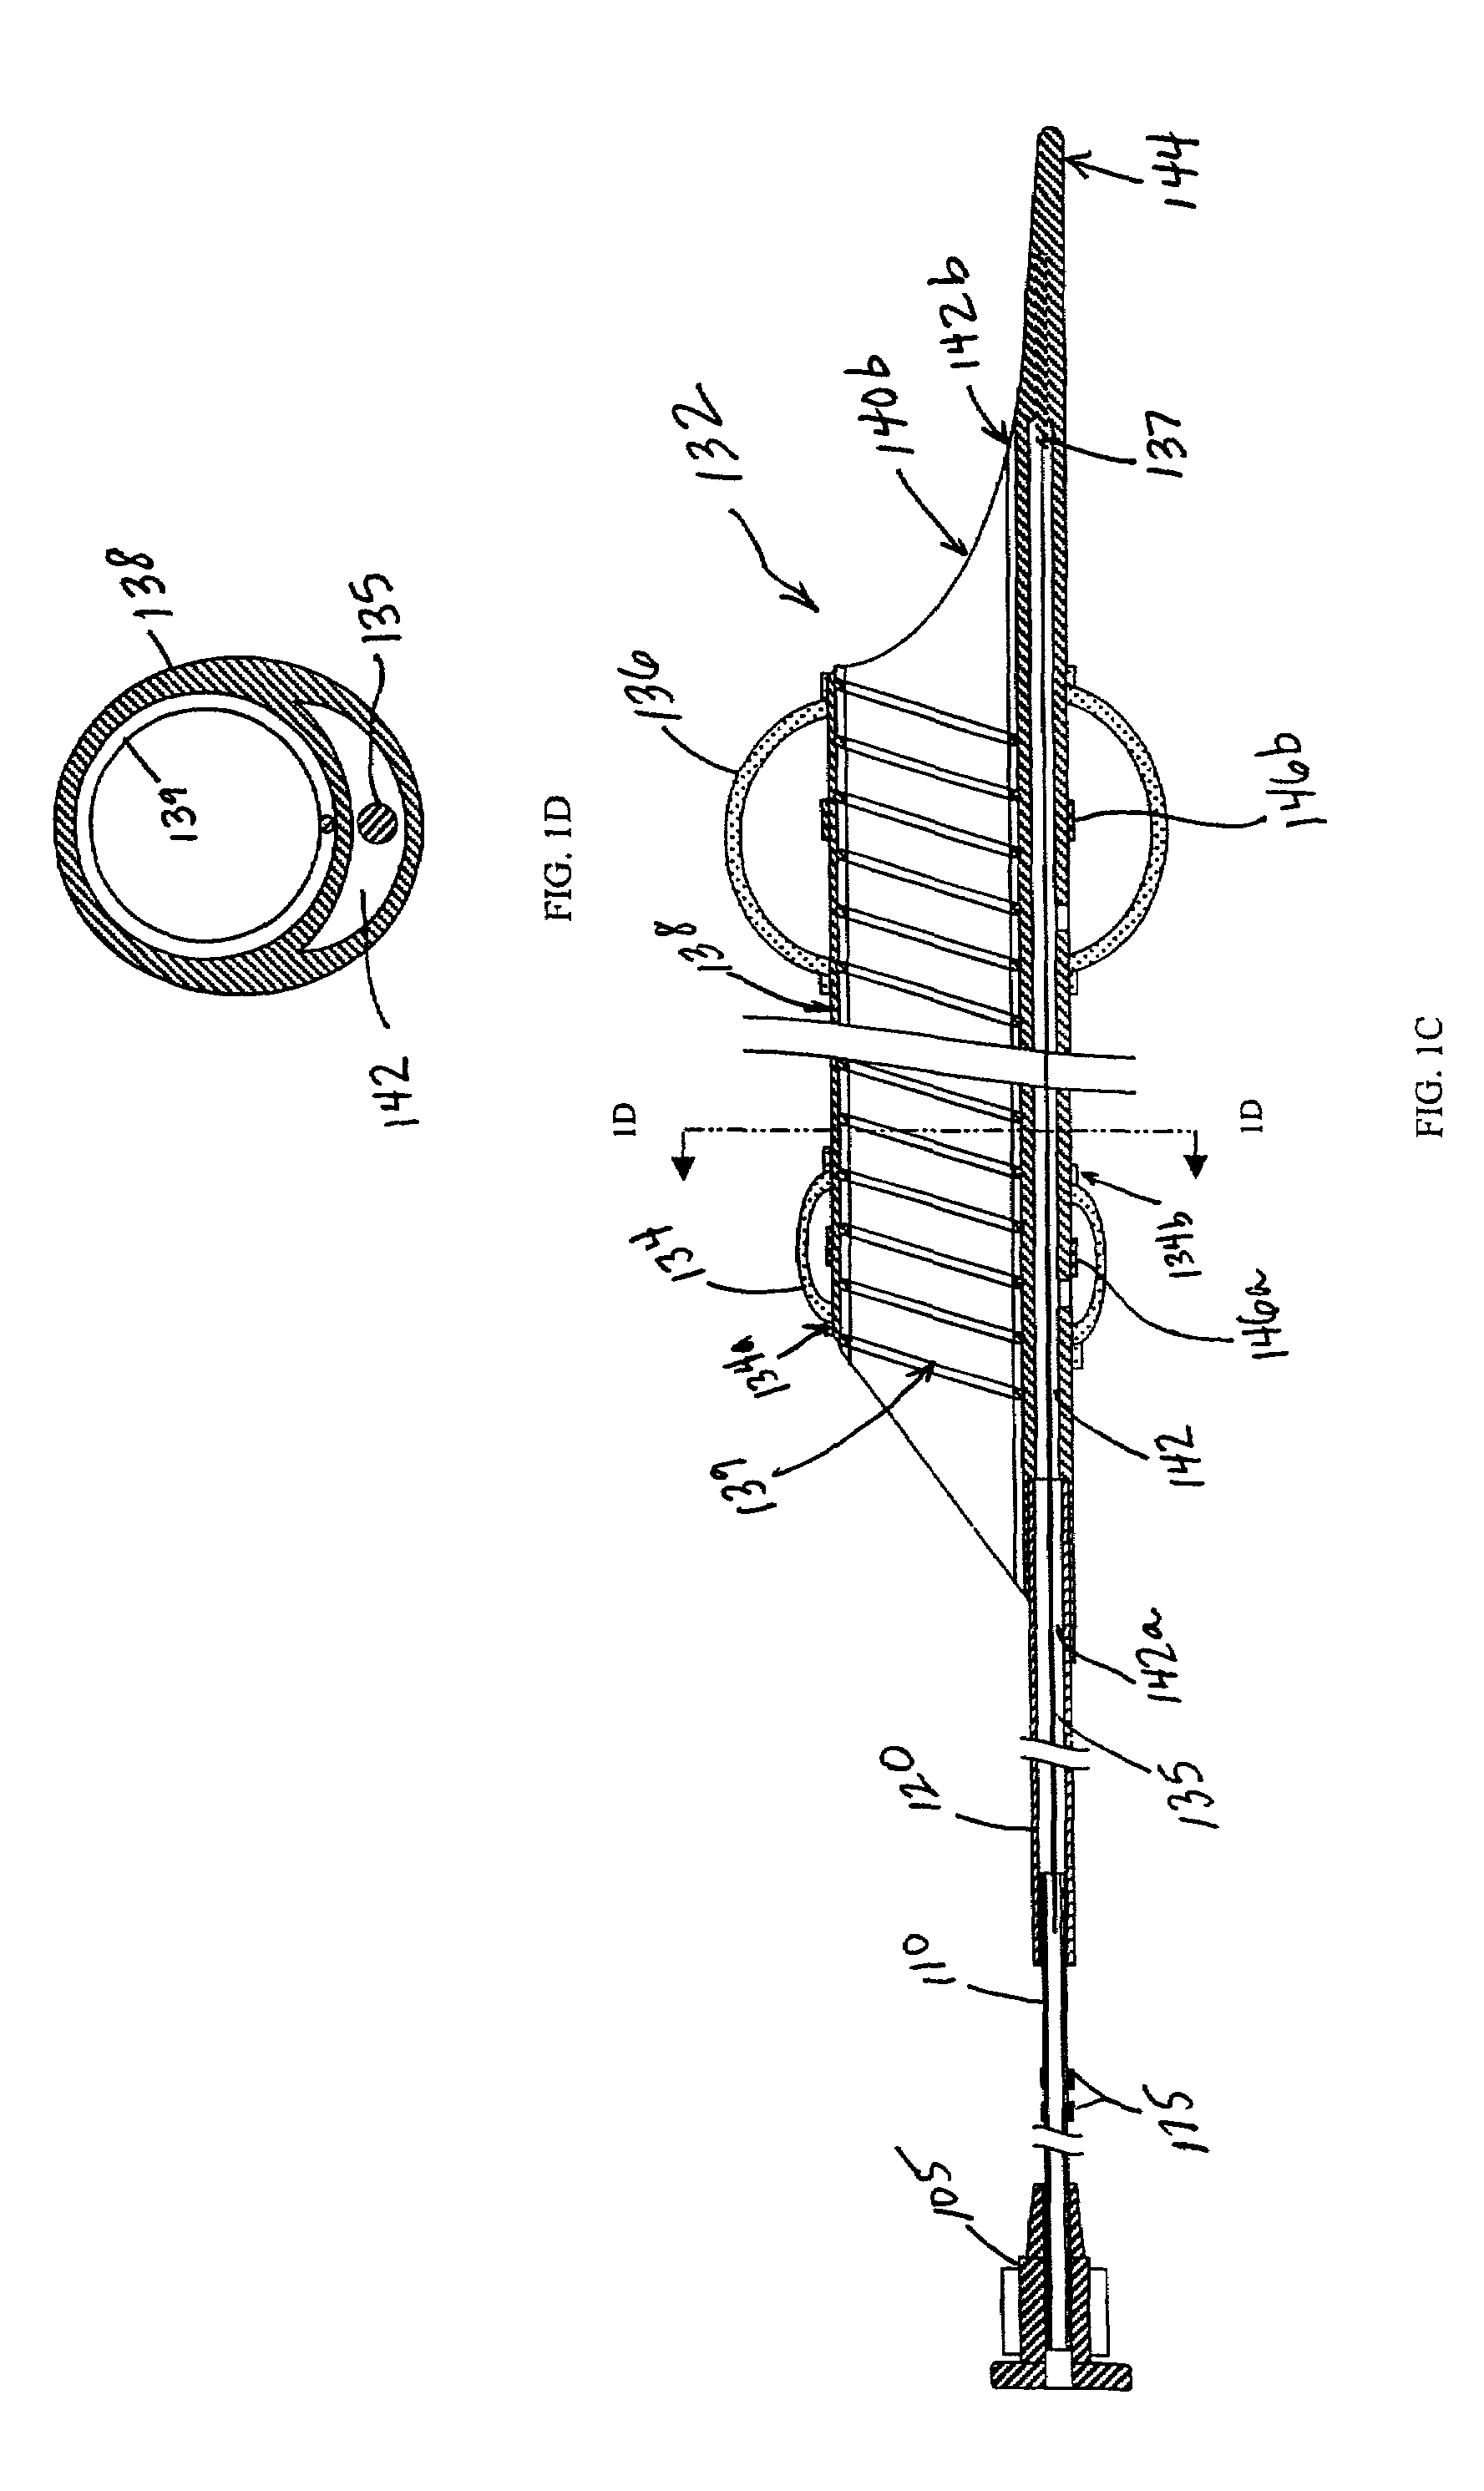 Emboli protection devices and related methods of use